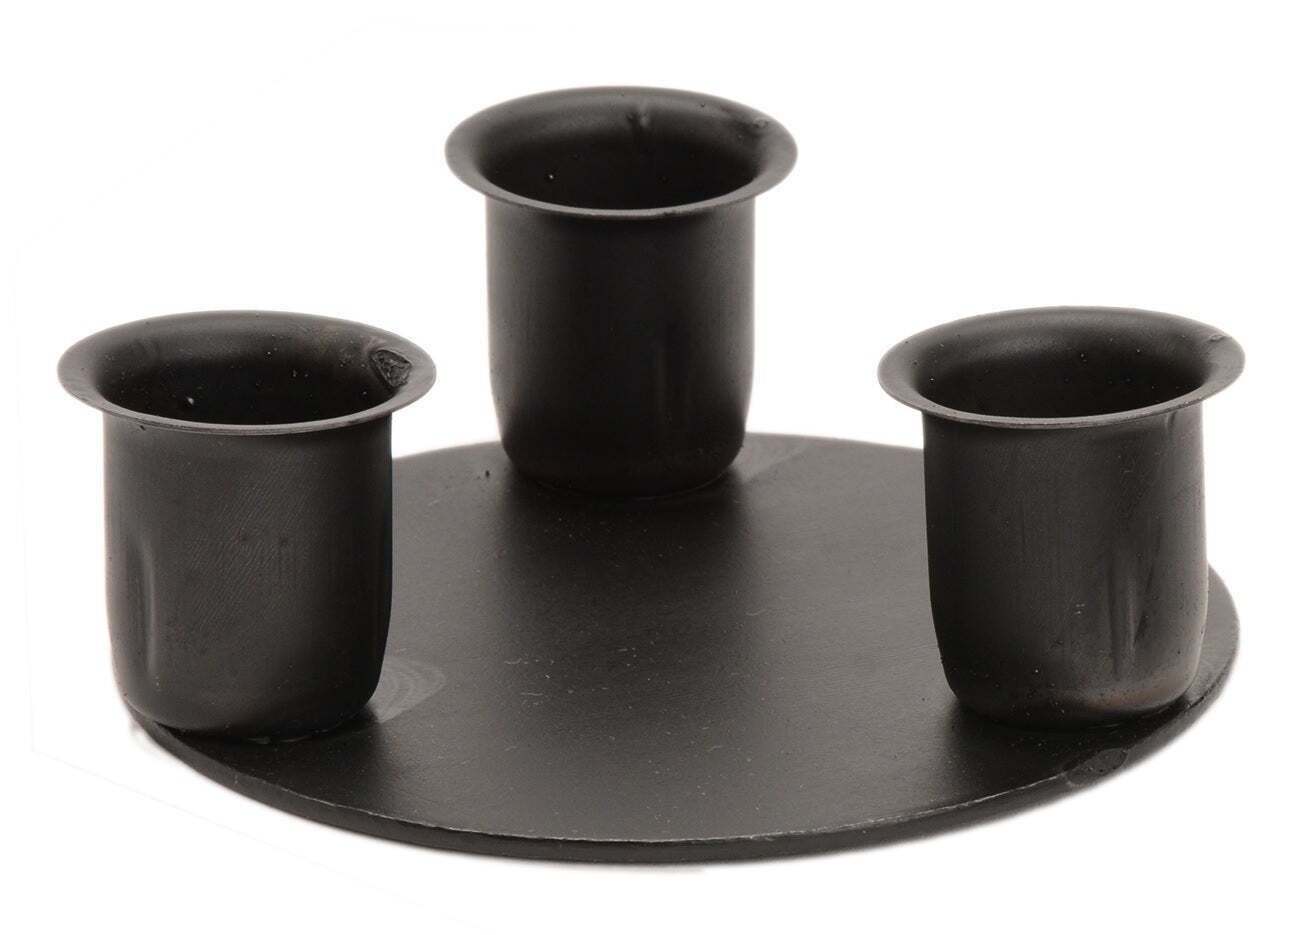 3 TAPER CANDLE HOLDER - Sturdy Solid Wrought Iron - $12.97